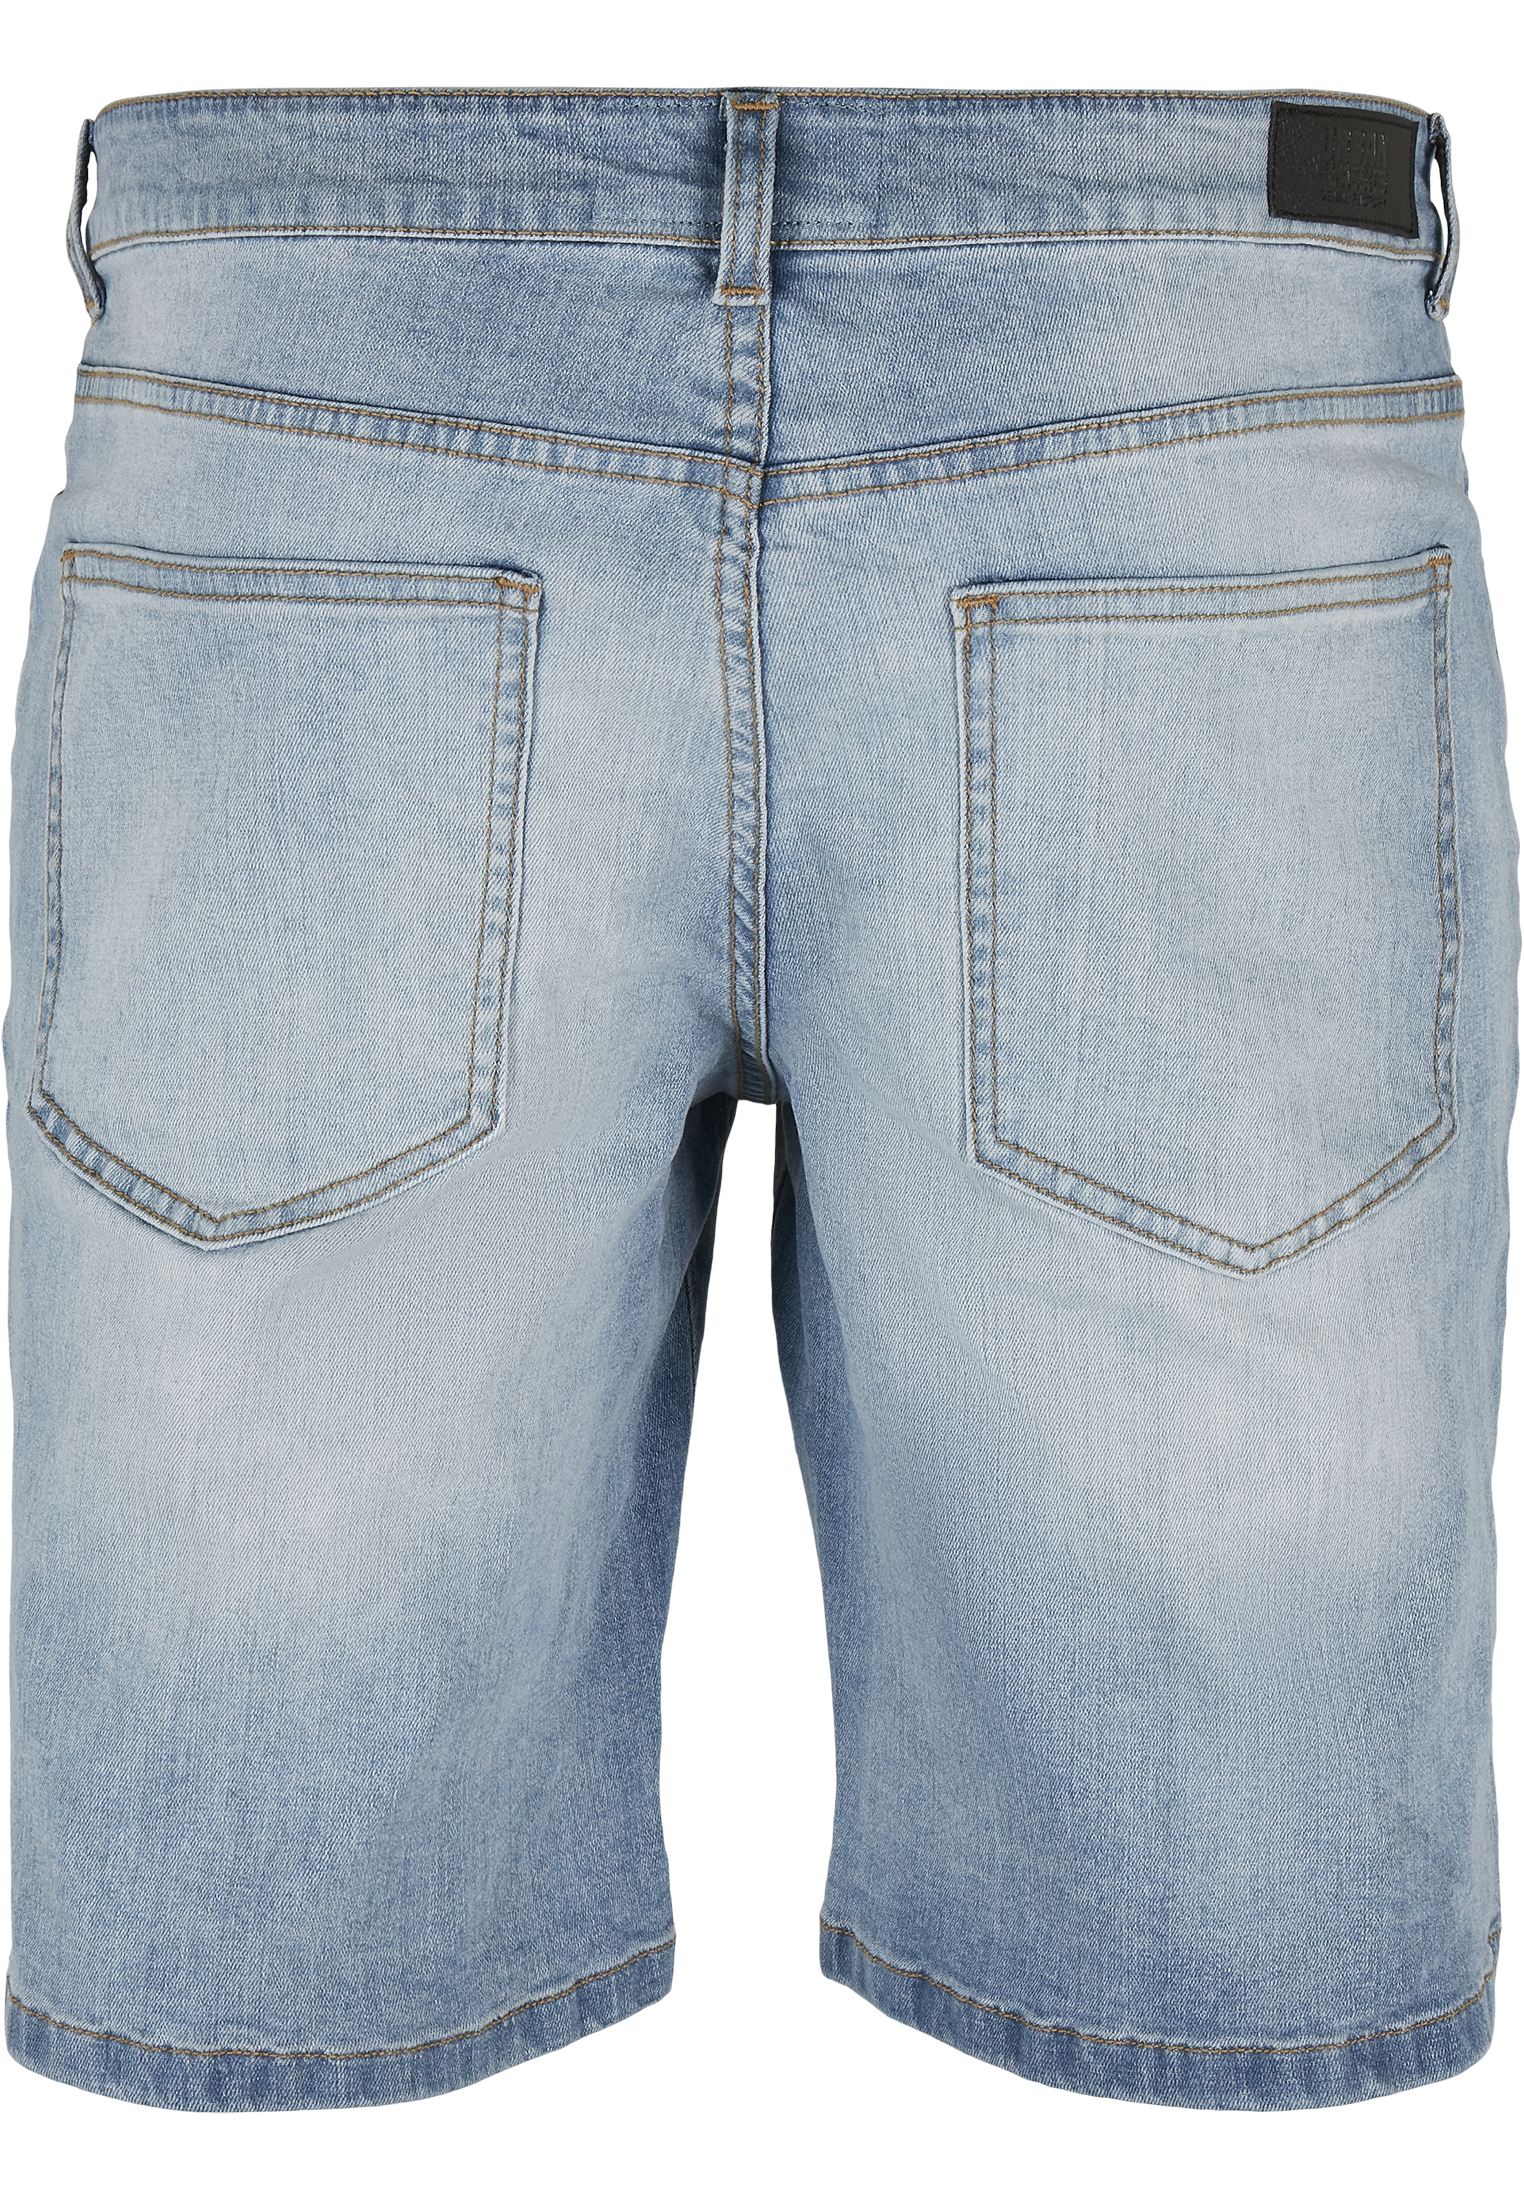 Kurze Hosen Relaxed Fit Jeans Shorts in Farbe light destroyed washed